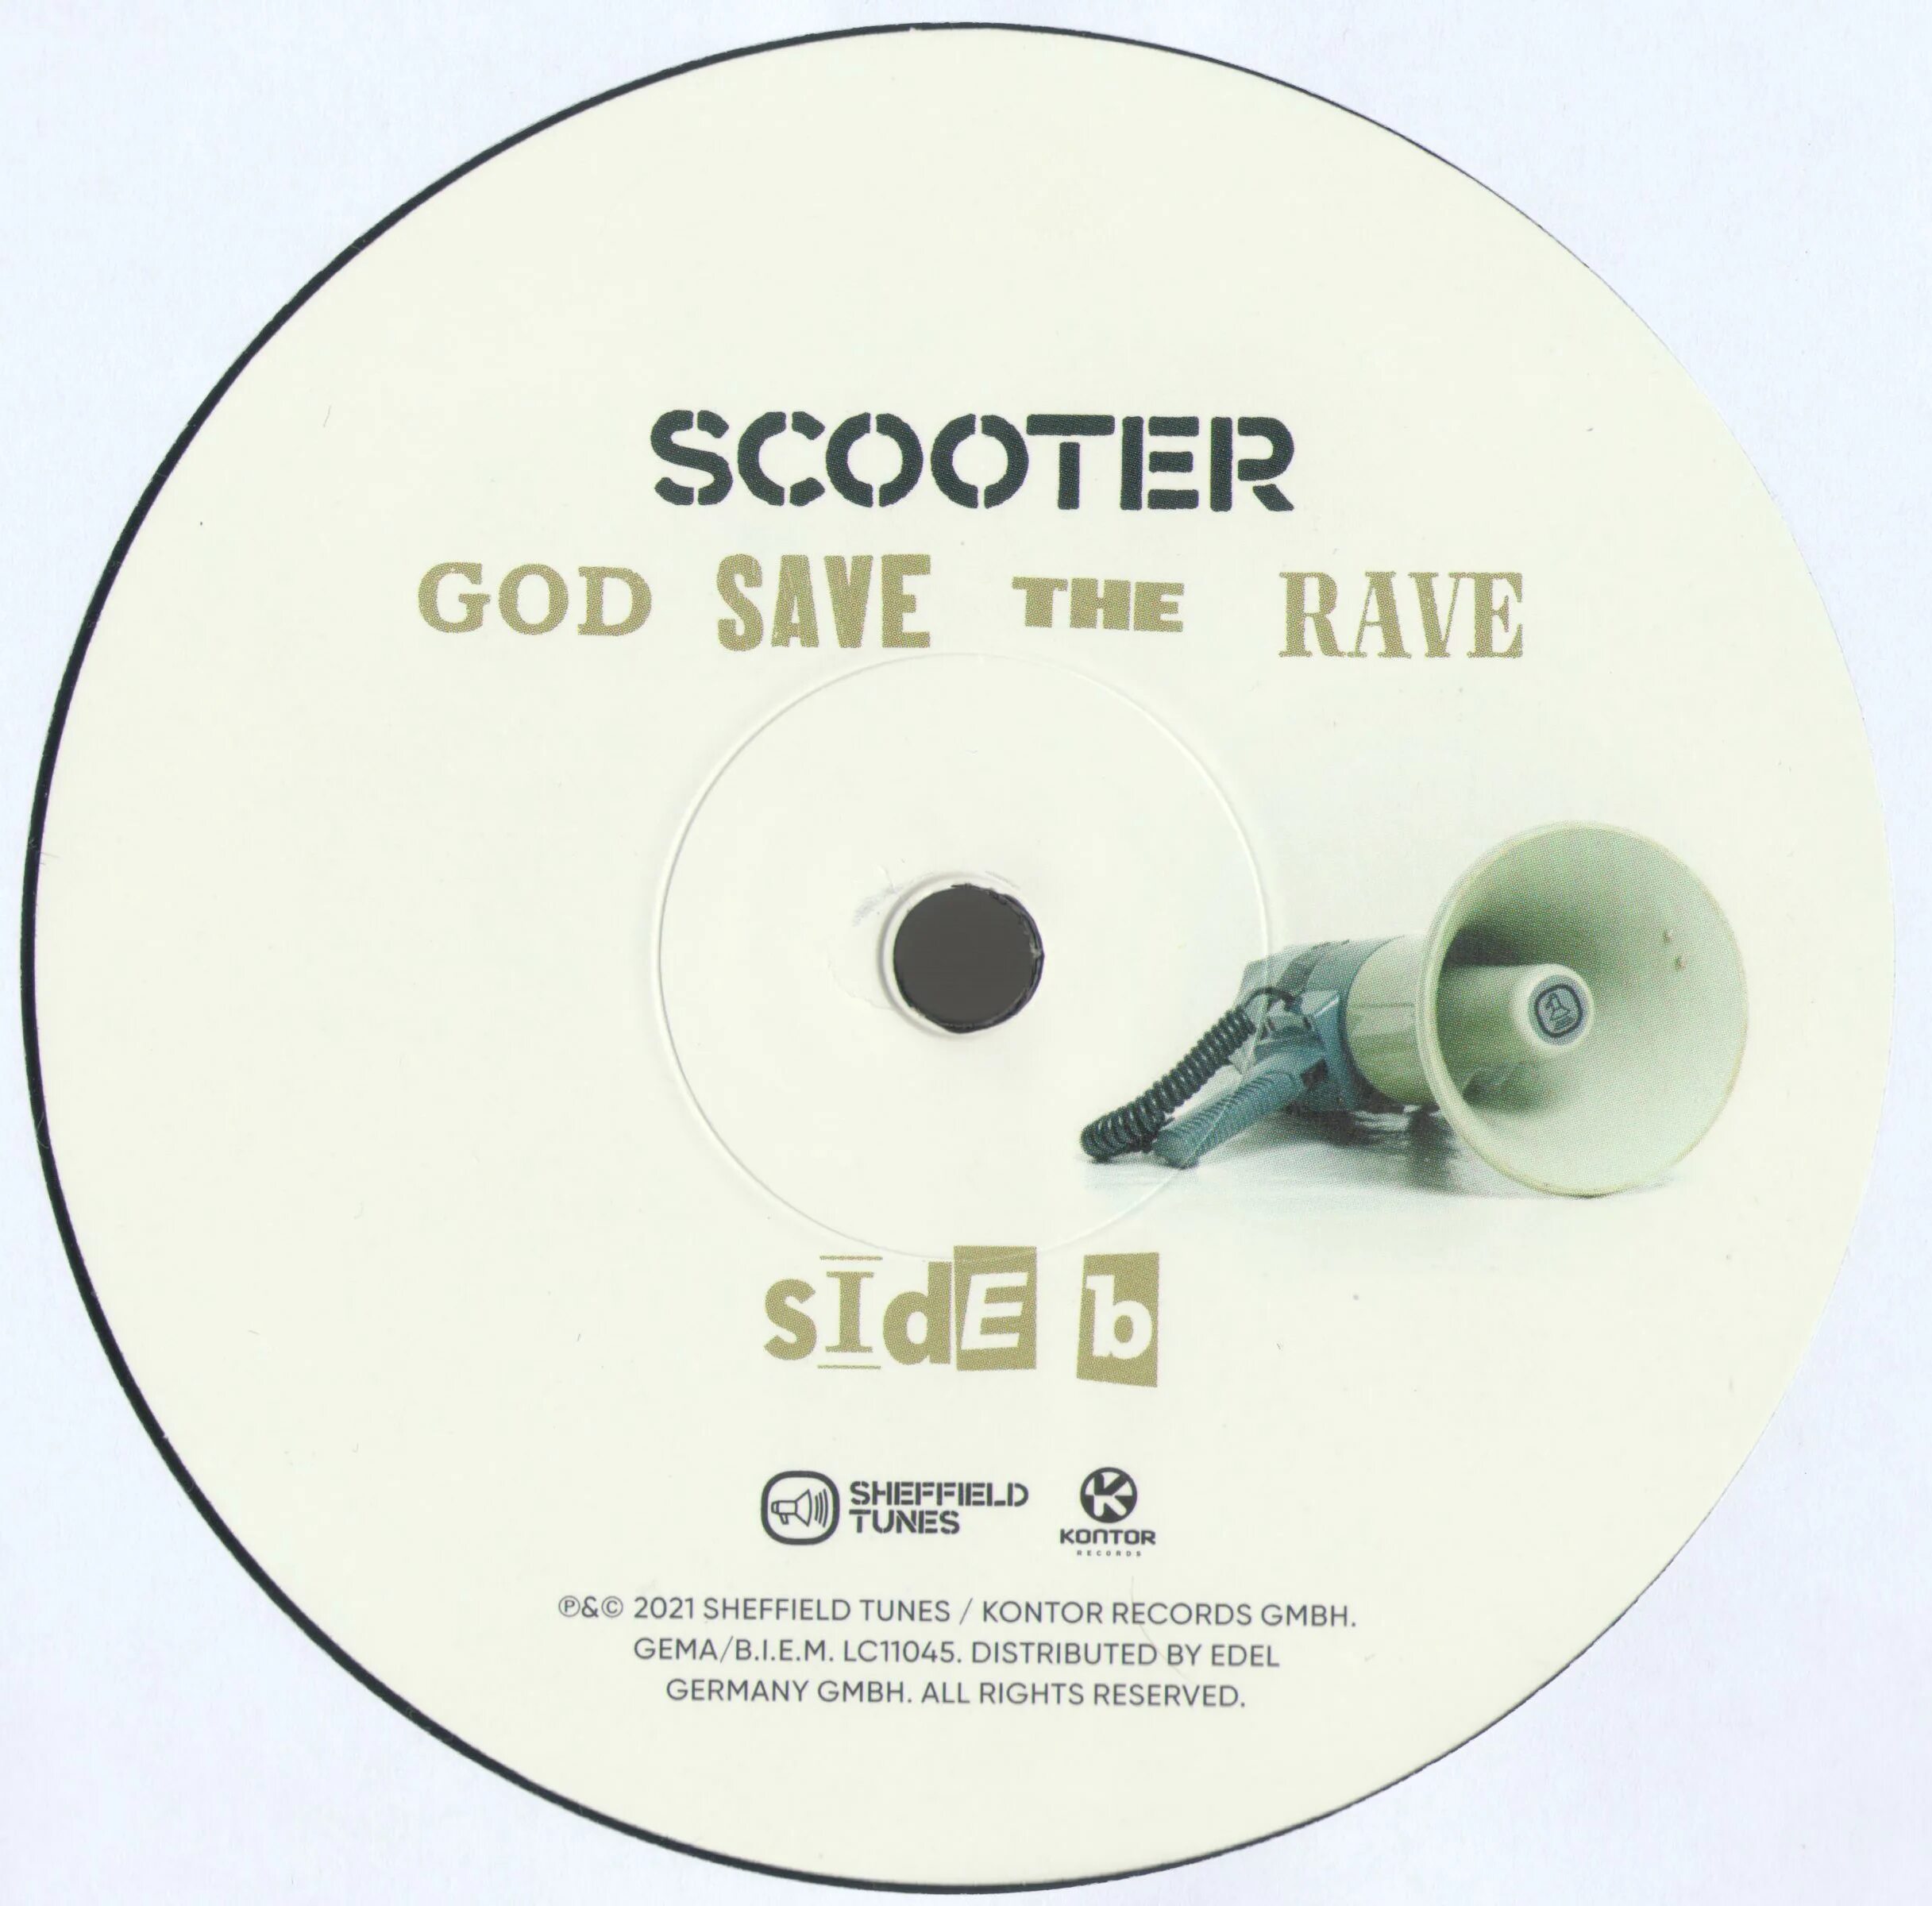 Scooter - God save the Rave (2021). Scooter Rave 2021. Scooter Harris Ford. God save the Rave.